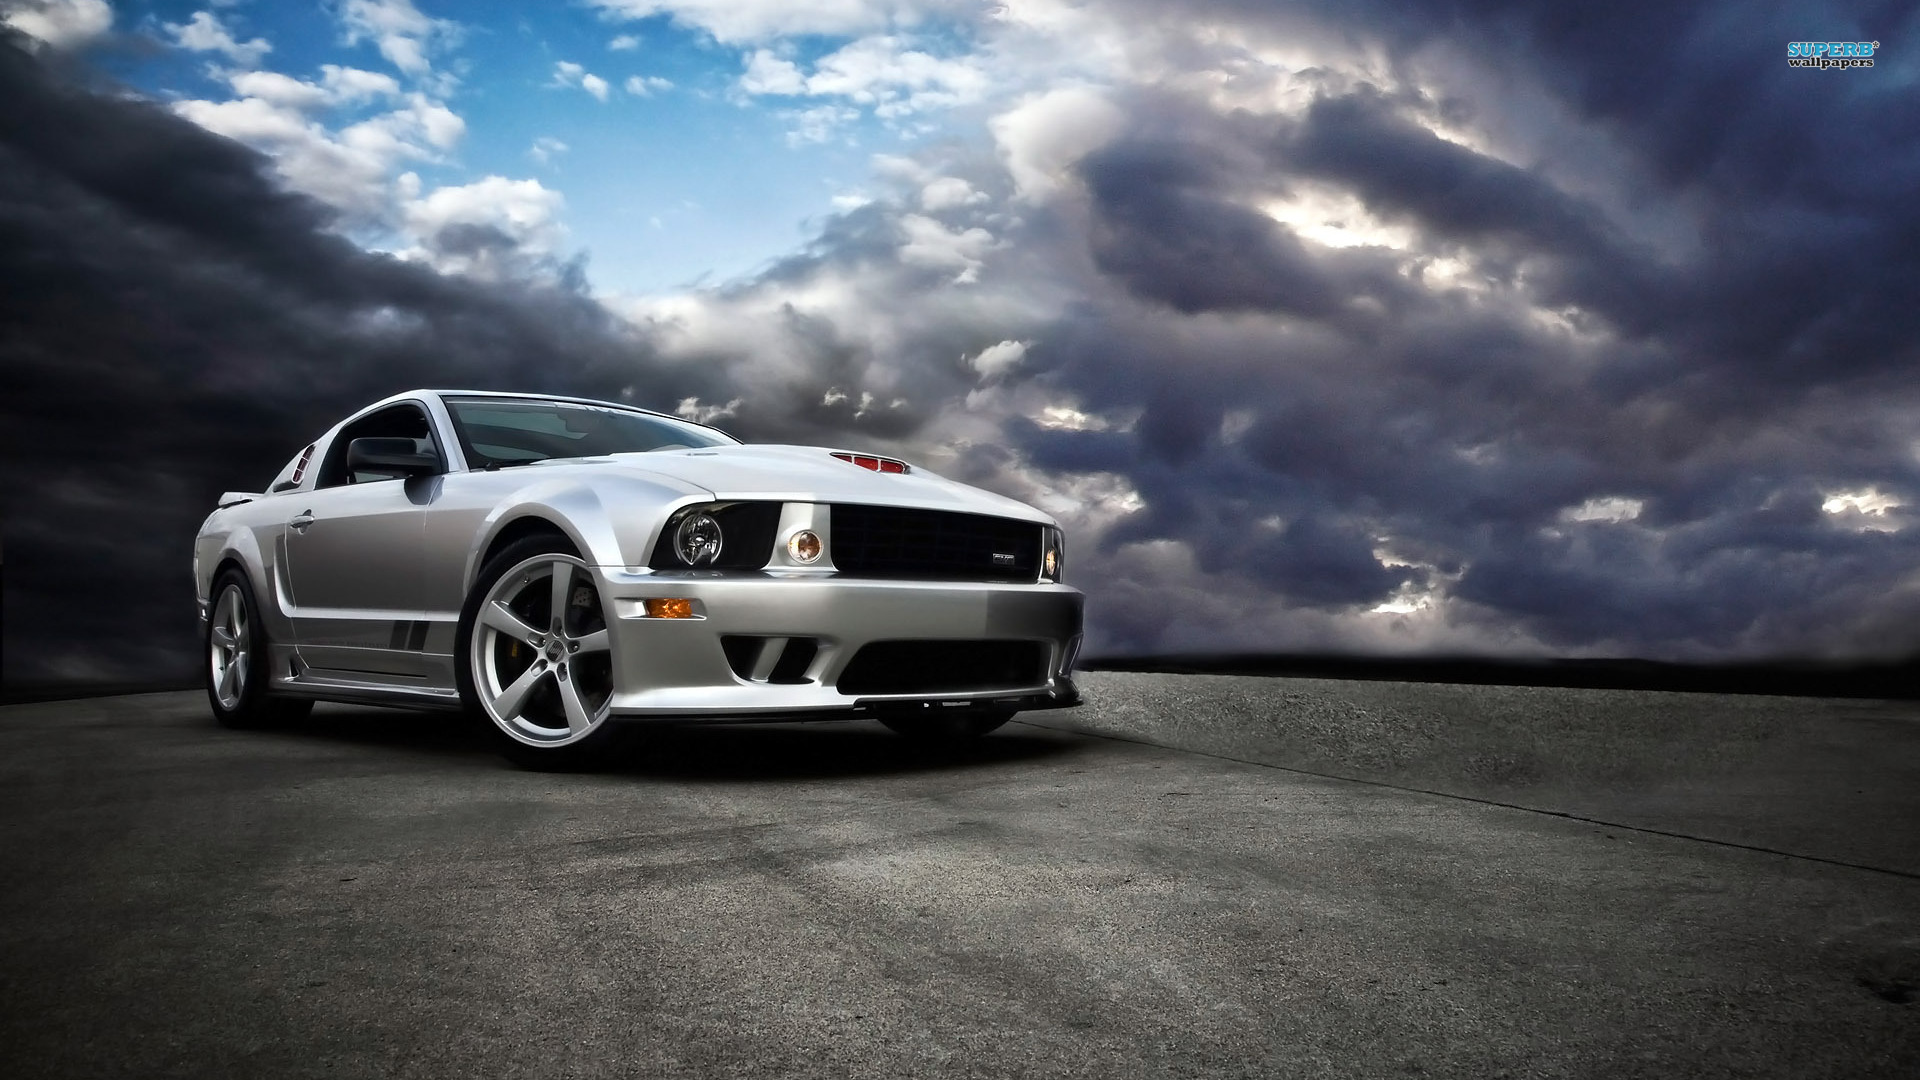 Ford Mustang Image Download